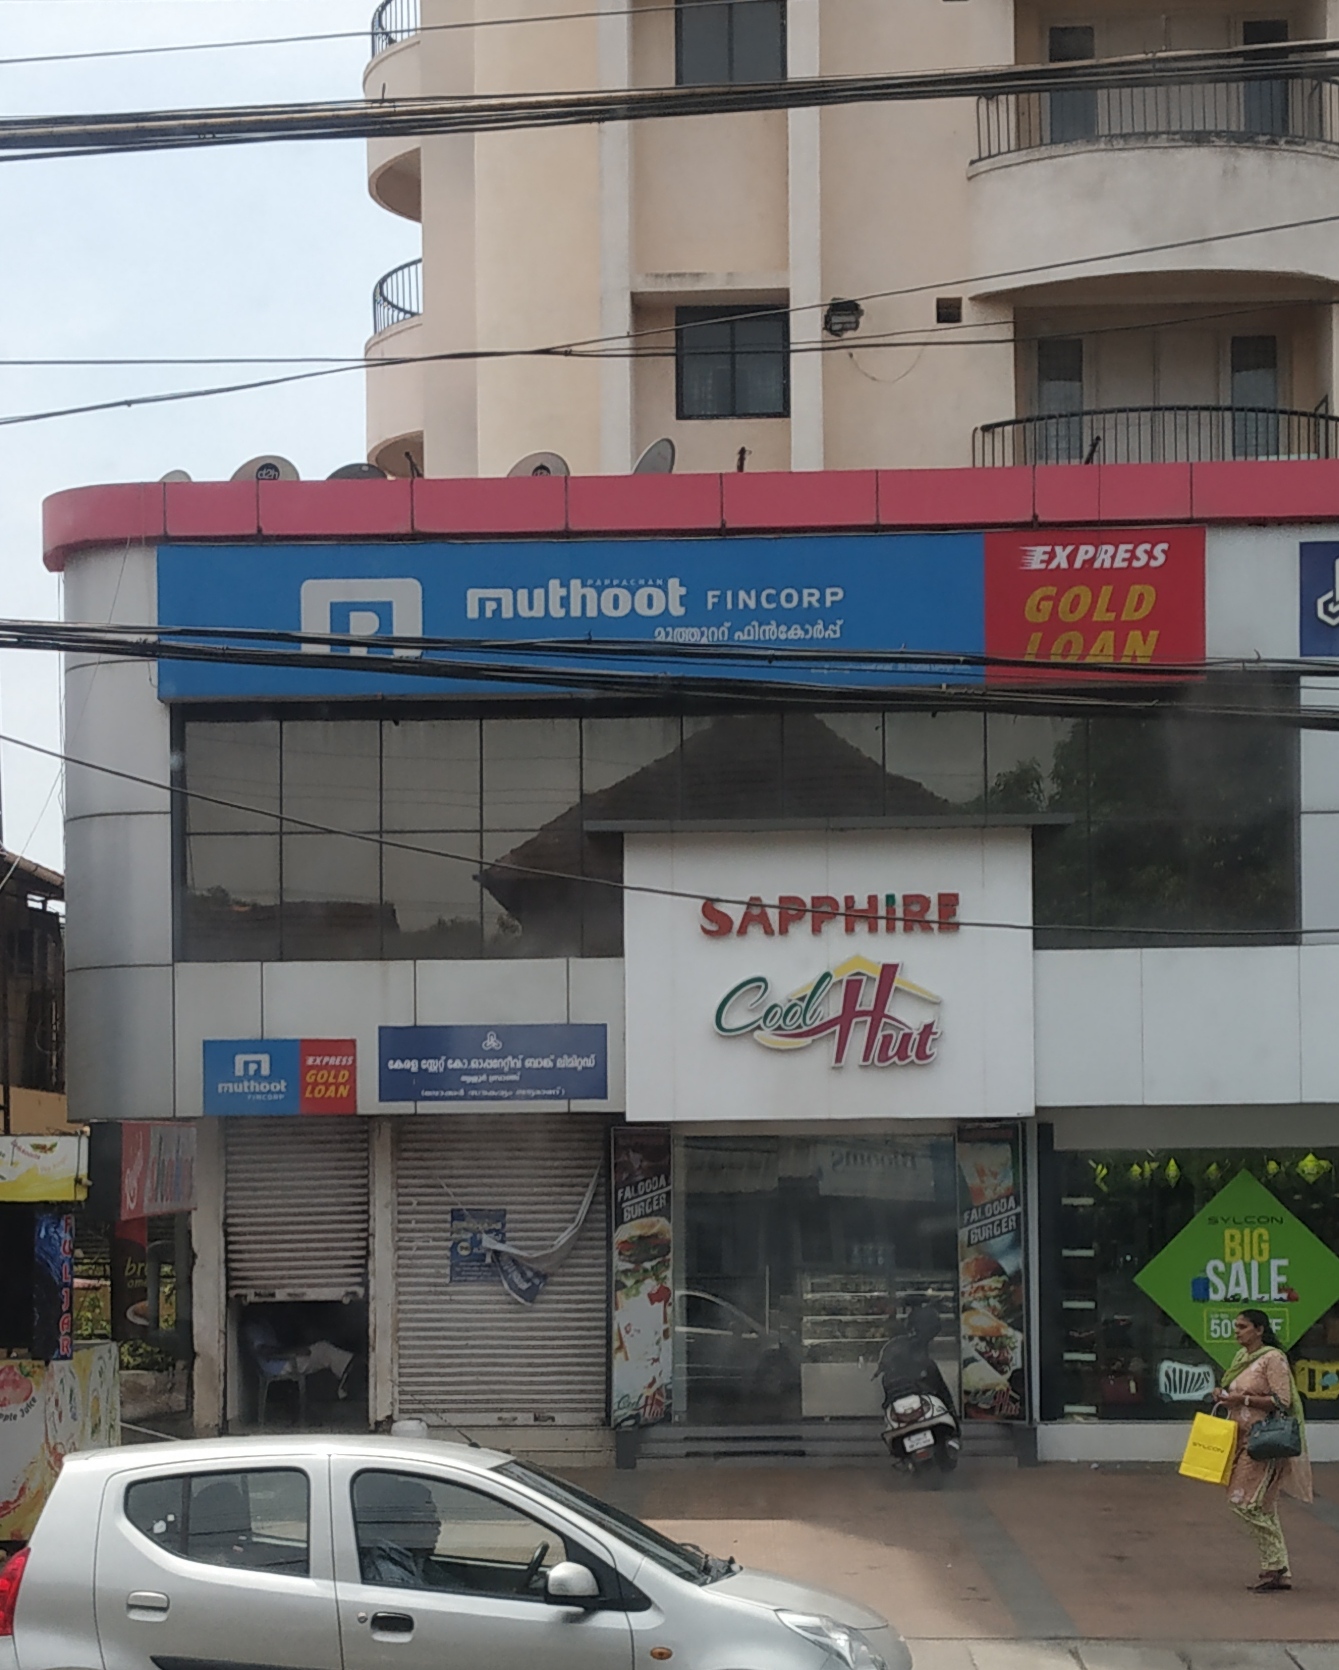 Muthoot Fincorp Gold Loan Services in St Thomas College Road, Thrissur, Kerala